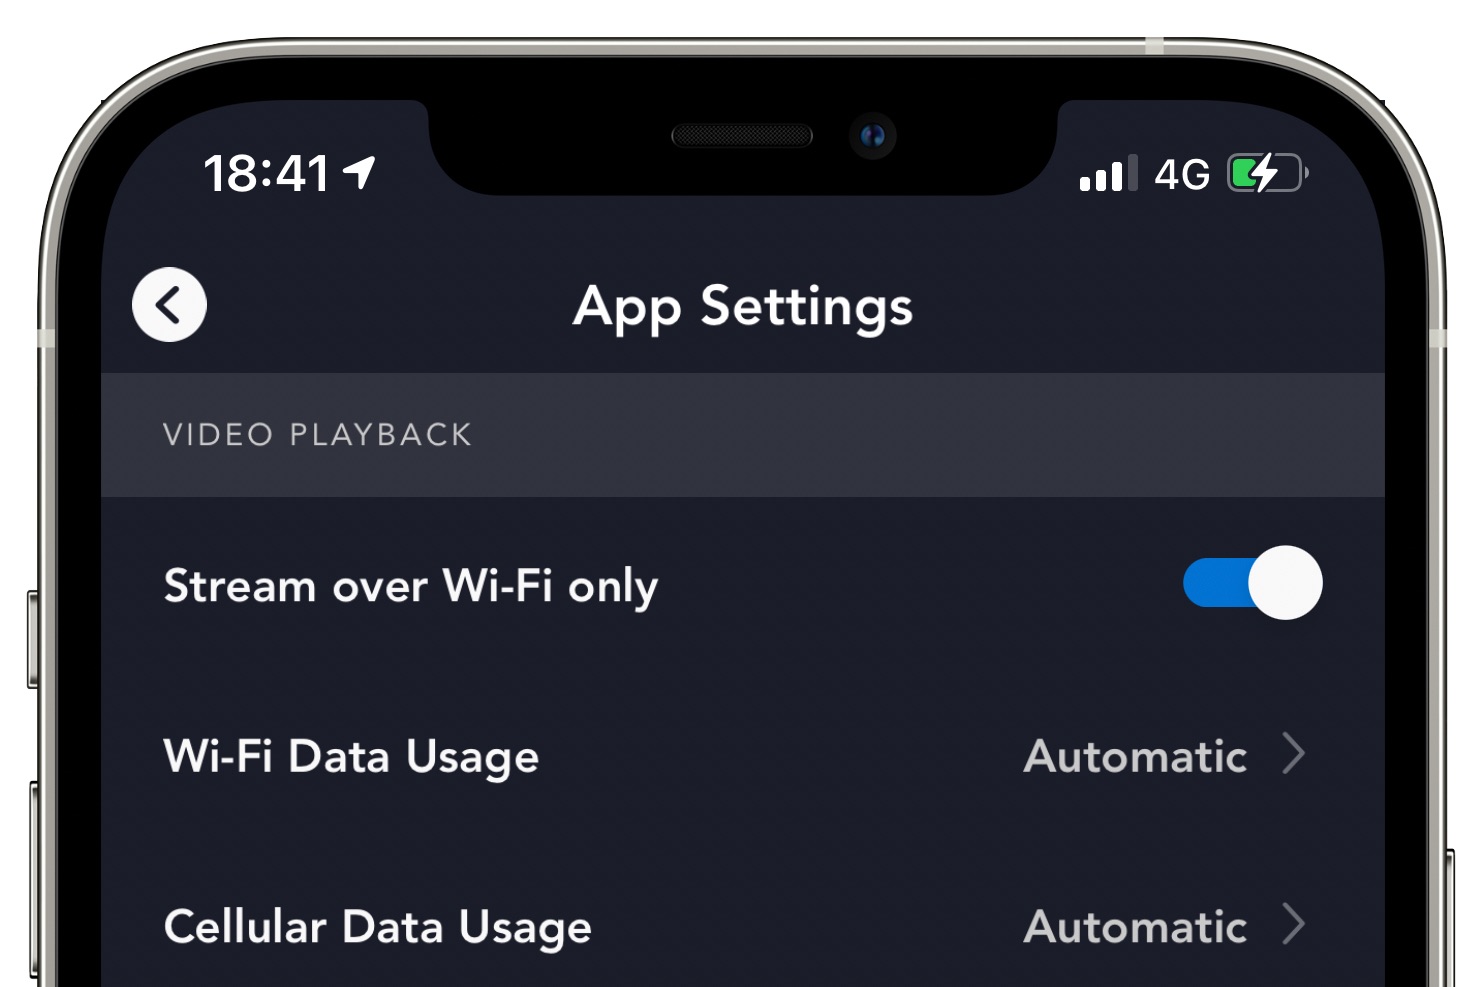 Disney+ data usage - iOS app with "Stream over Wi-Fi only" selected